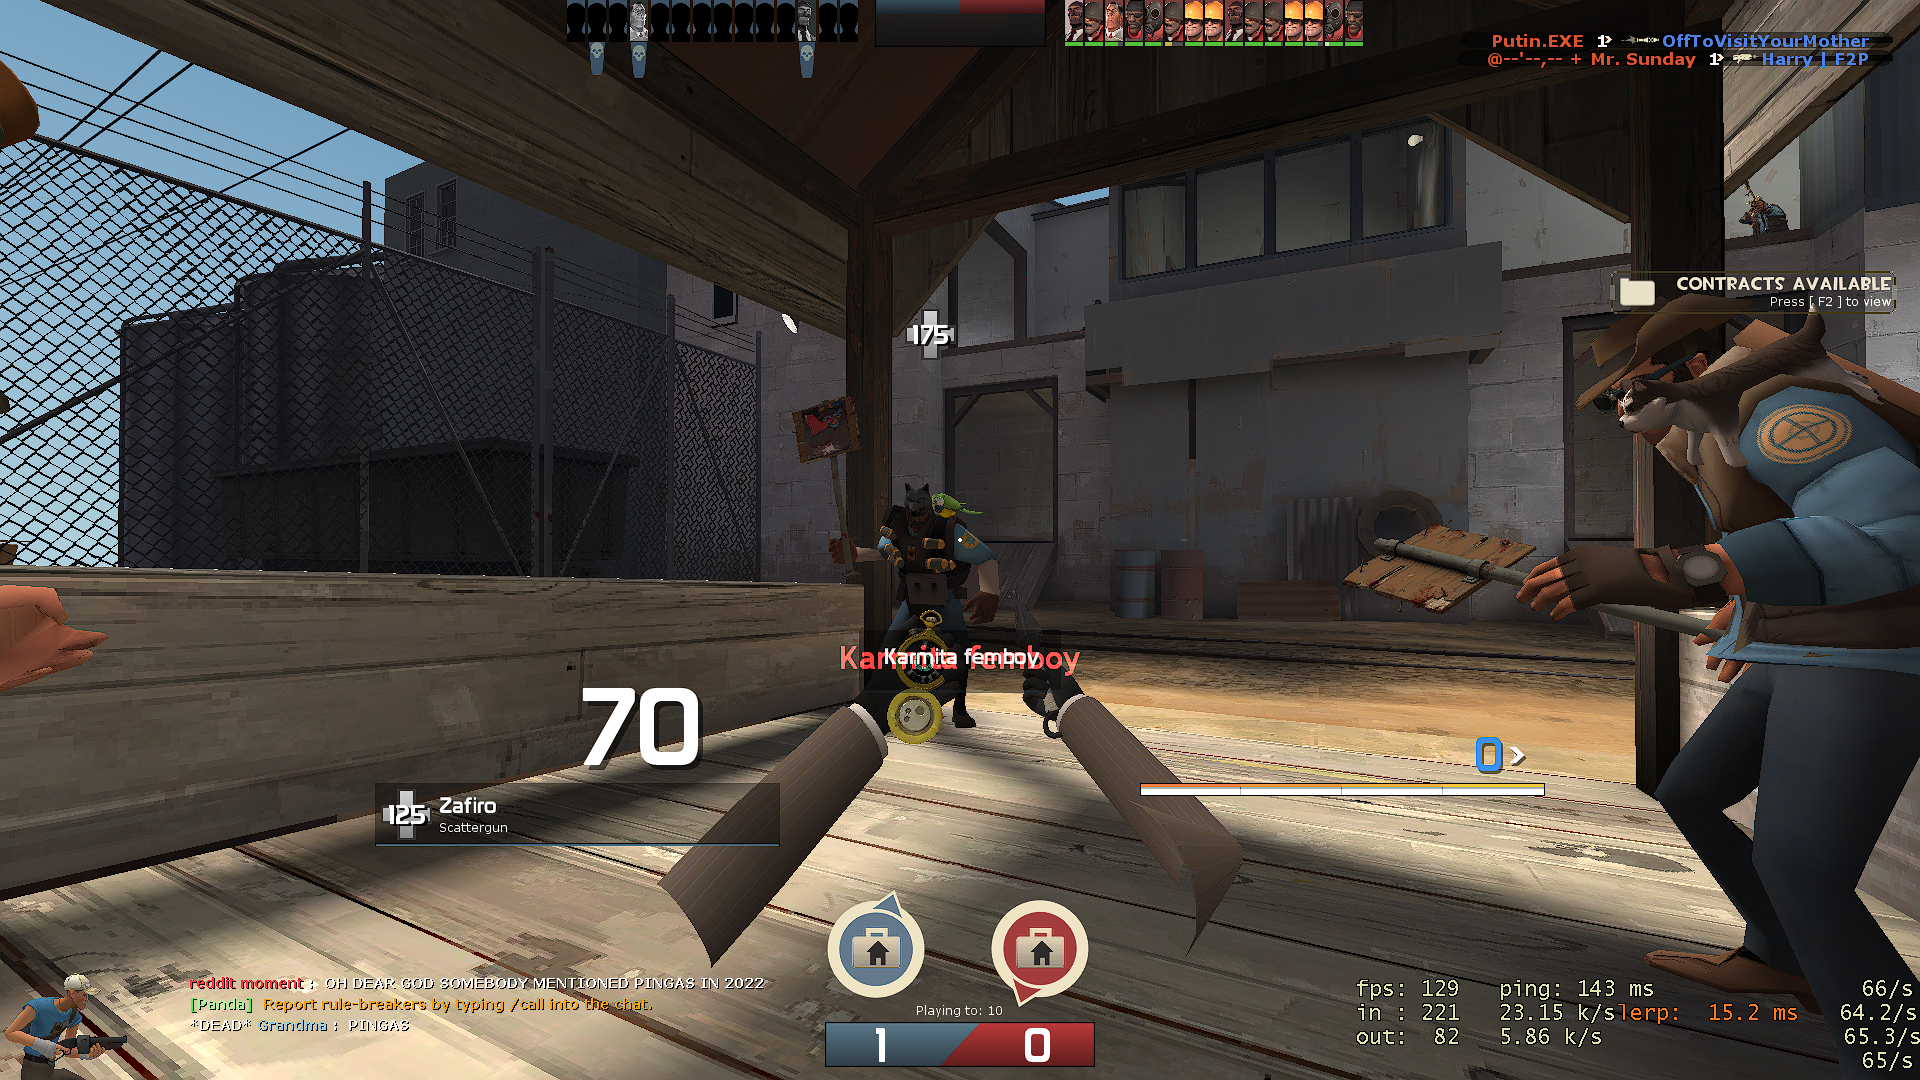 Team Fortress 2_2022.05.19-22.19.png